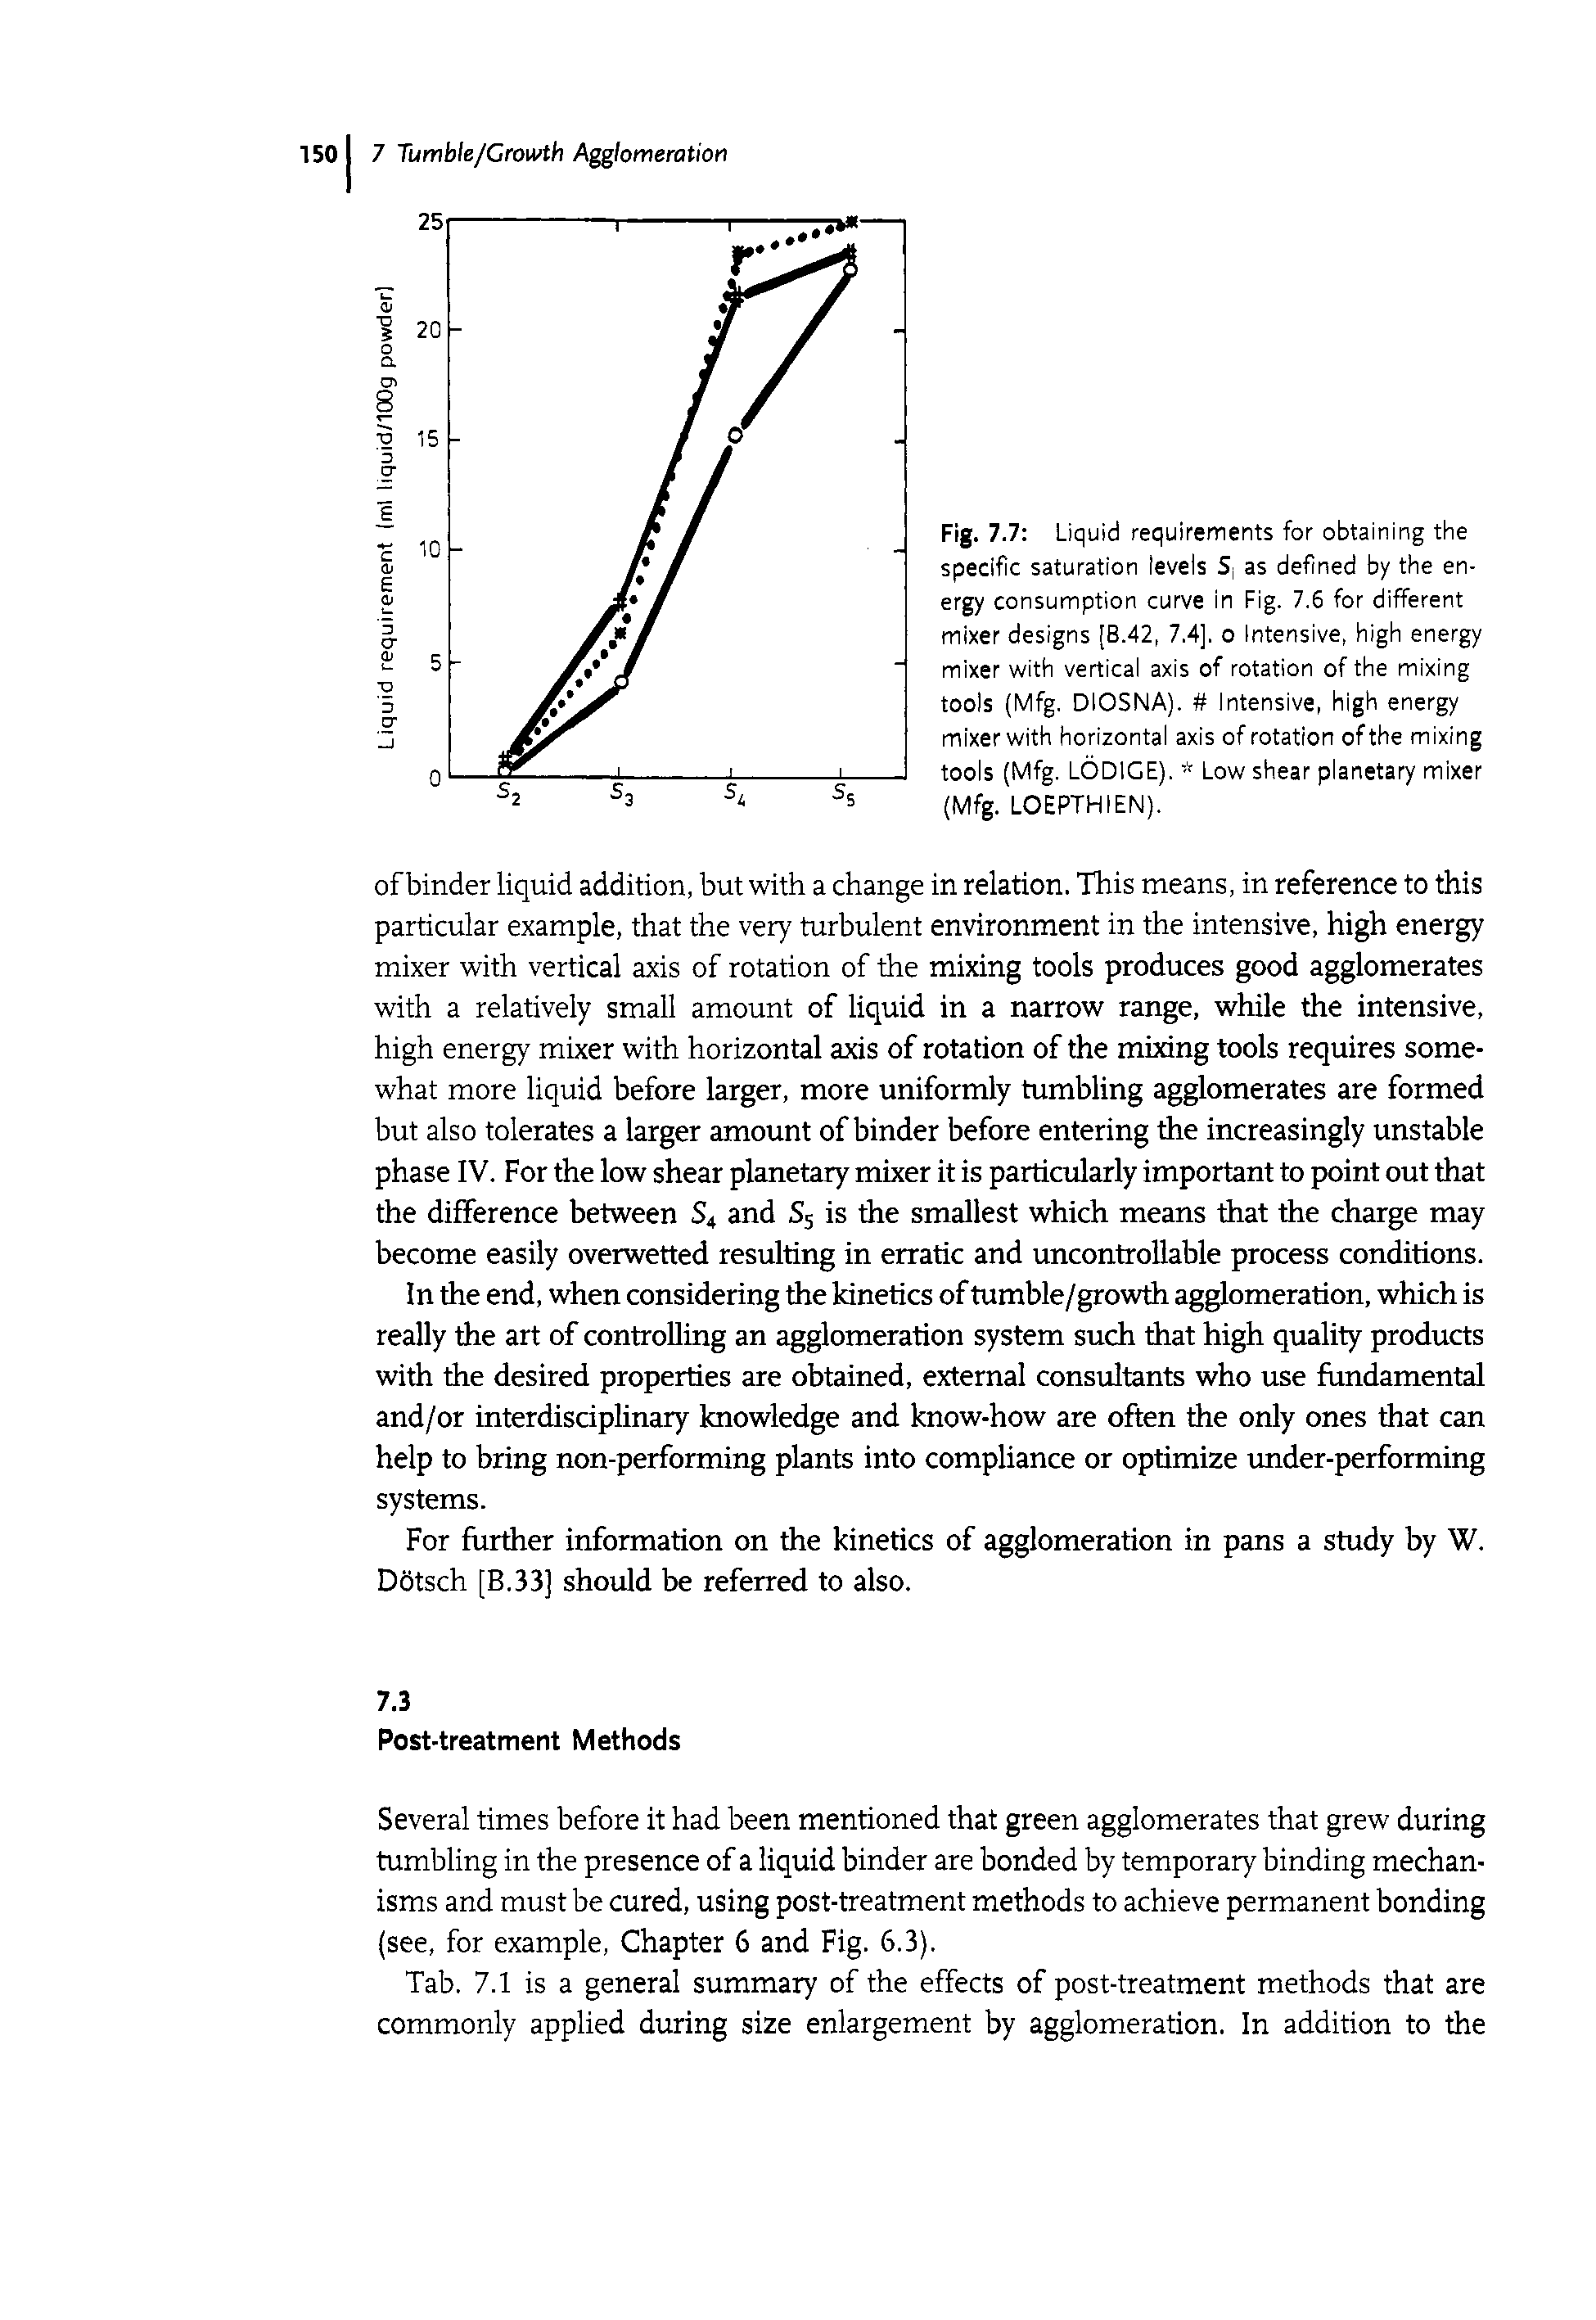 Fig. 7.7 Liquid requirements for obtaining the specific saturation levels S as defined by the energy consumption curve in Fig. 7.5 for different mixer designs [B.42, 7.4]. o Intensive, high energy mixer with vertical axis of rotation of the mixing tools (Mfg. DIOSNA). Intensive, high energy mixer with horizontal axis of rotation of the mixing tools (Mfg. LODIGE). Low shear planetary mixer (Mfg. LOEPTHIEN).